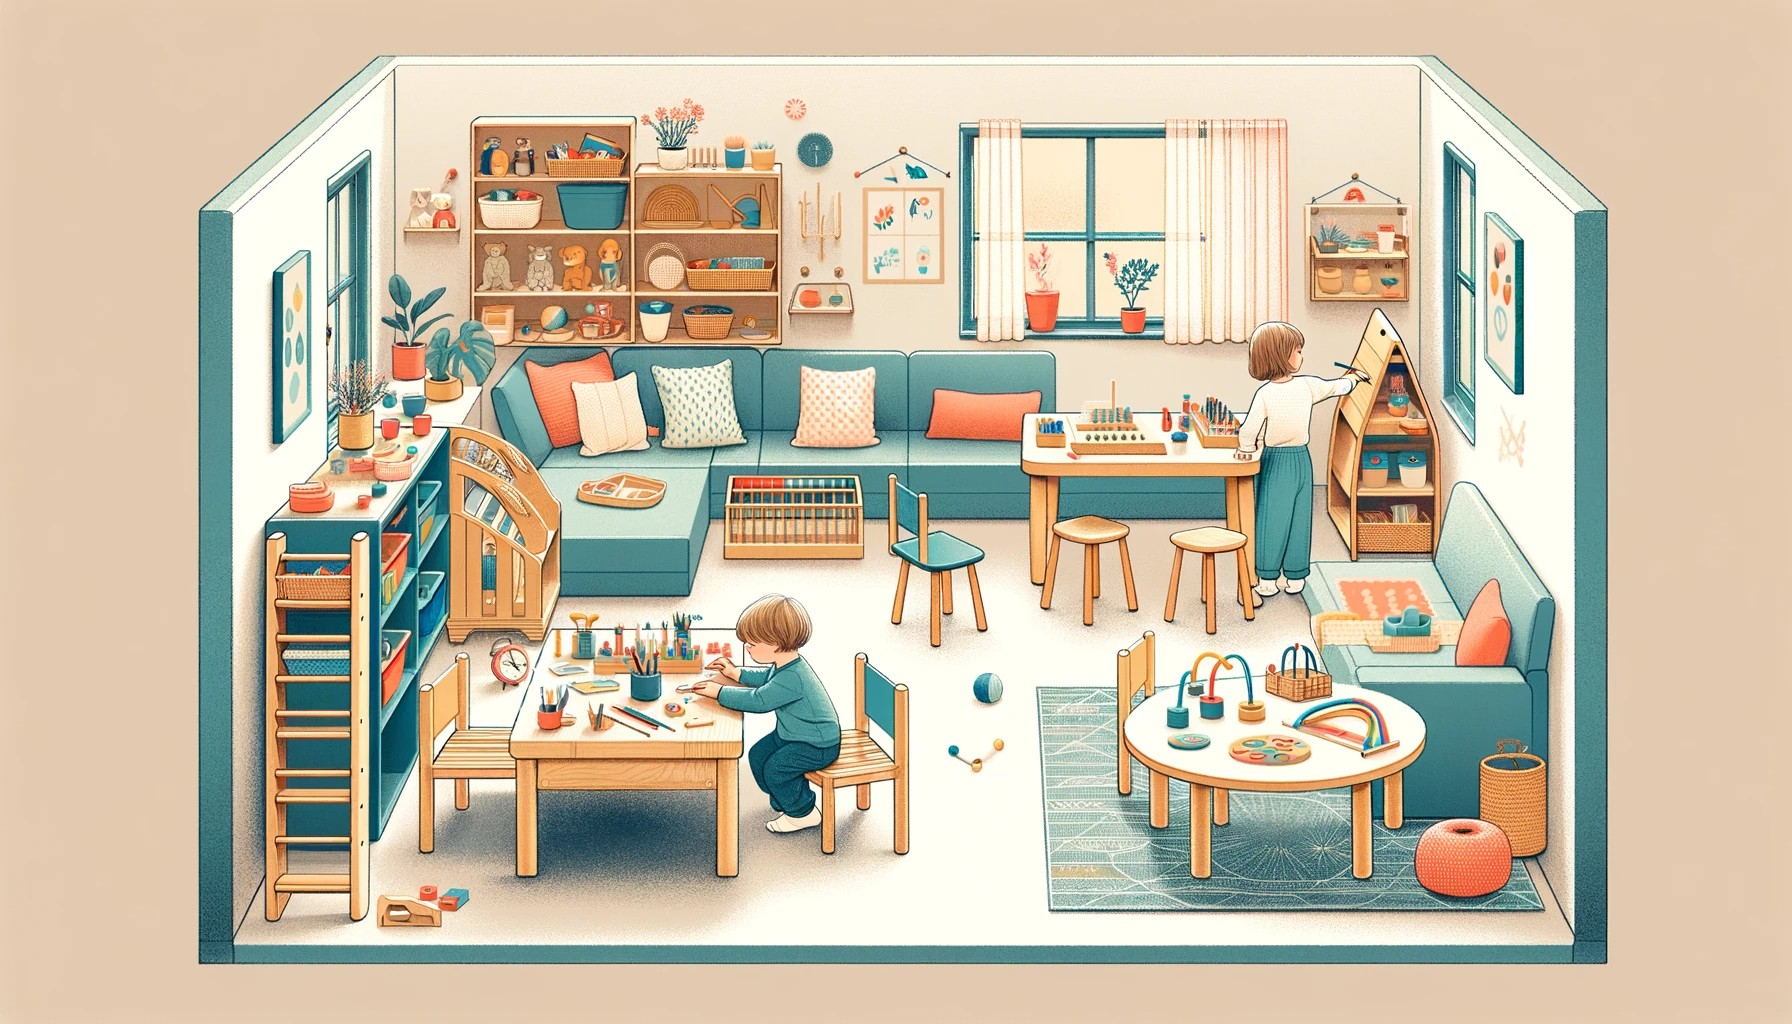 home setting transformed into a Montessori learning environment, depicting a space organized with Montessori principles where children are engaging independently and collaboratively with various materials.